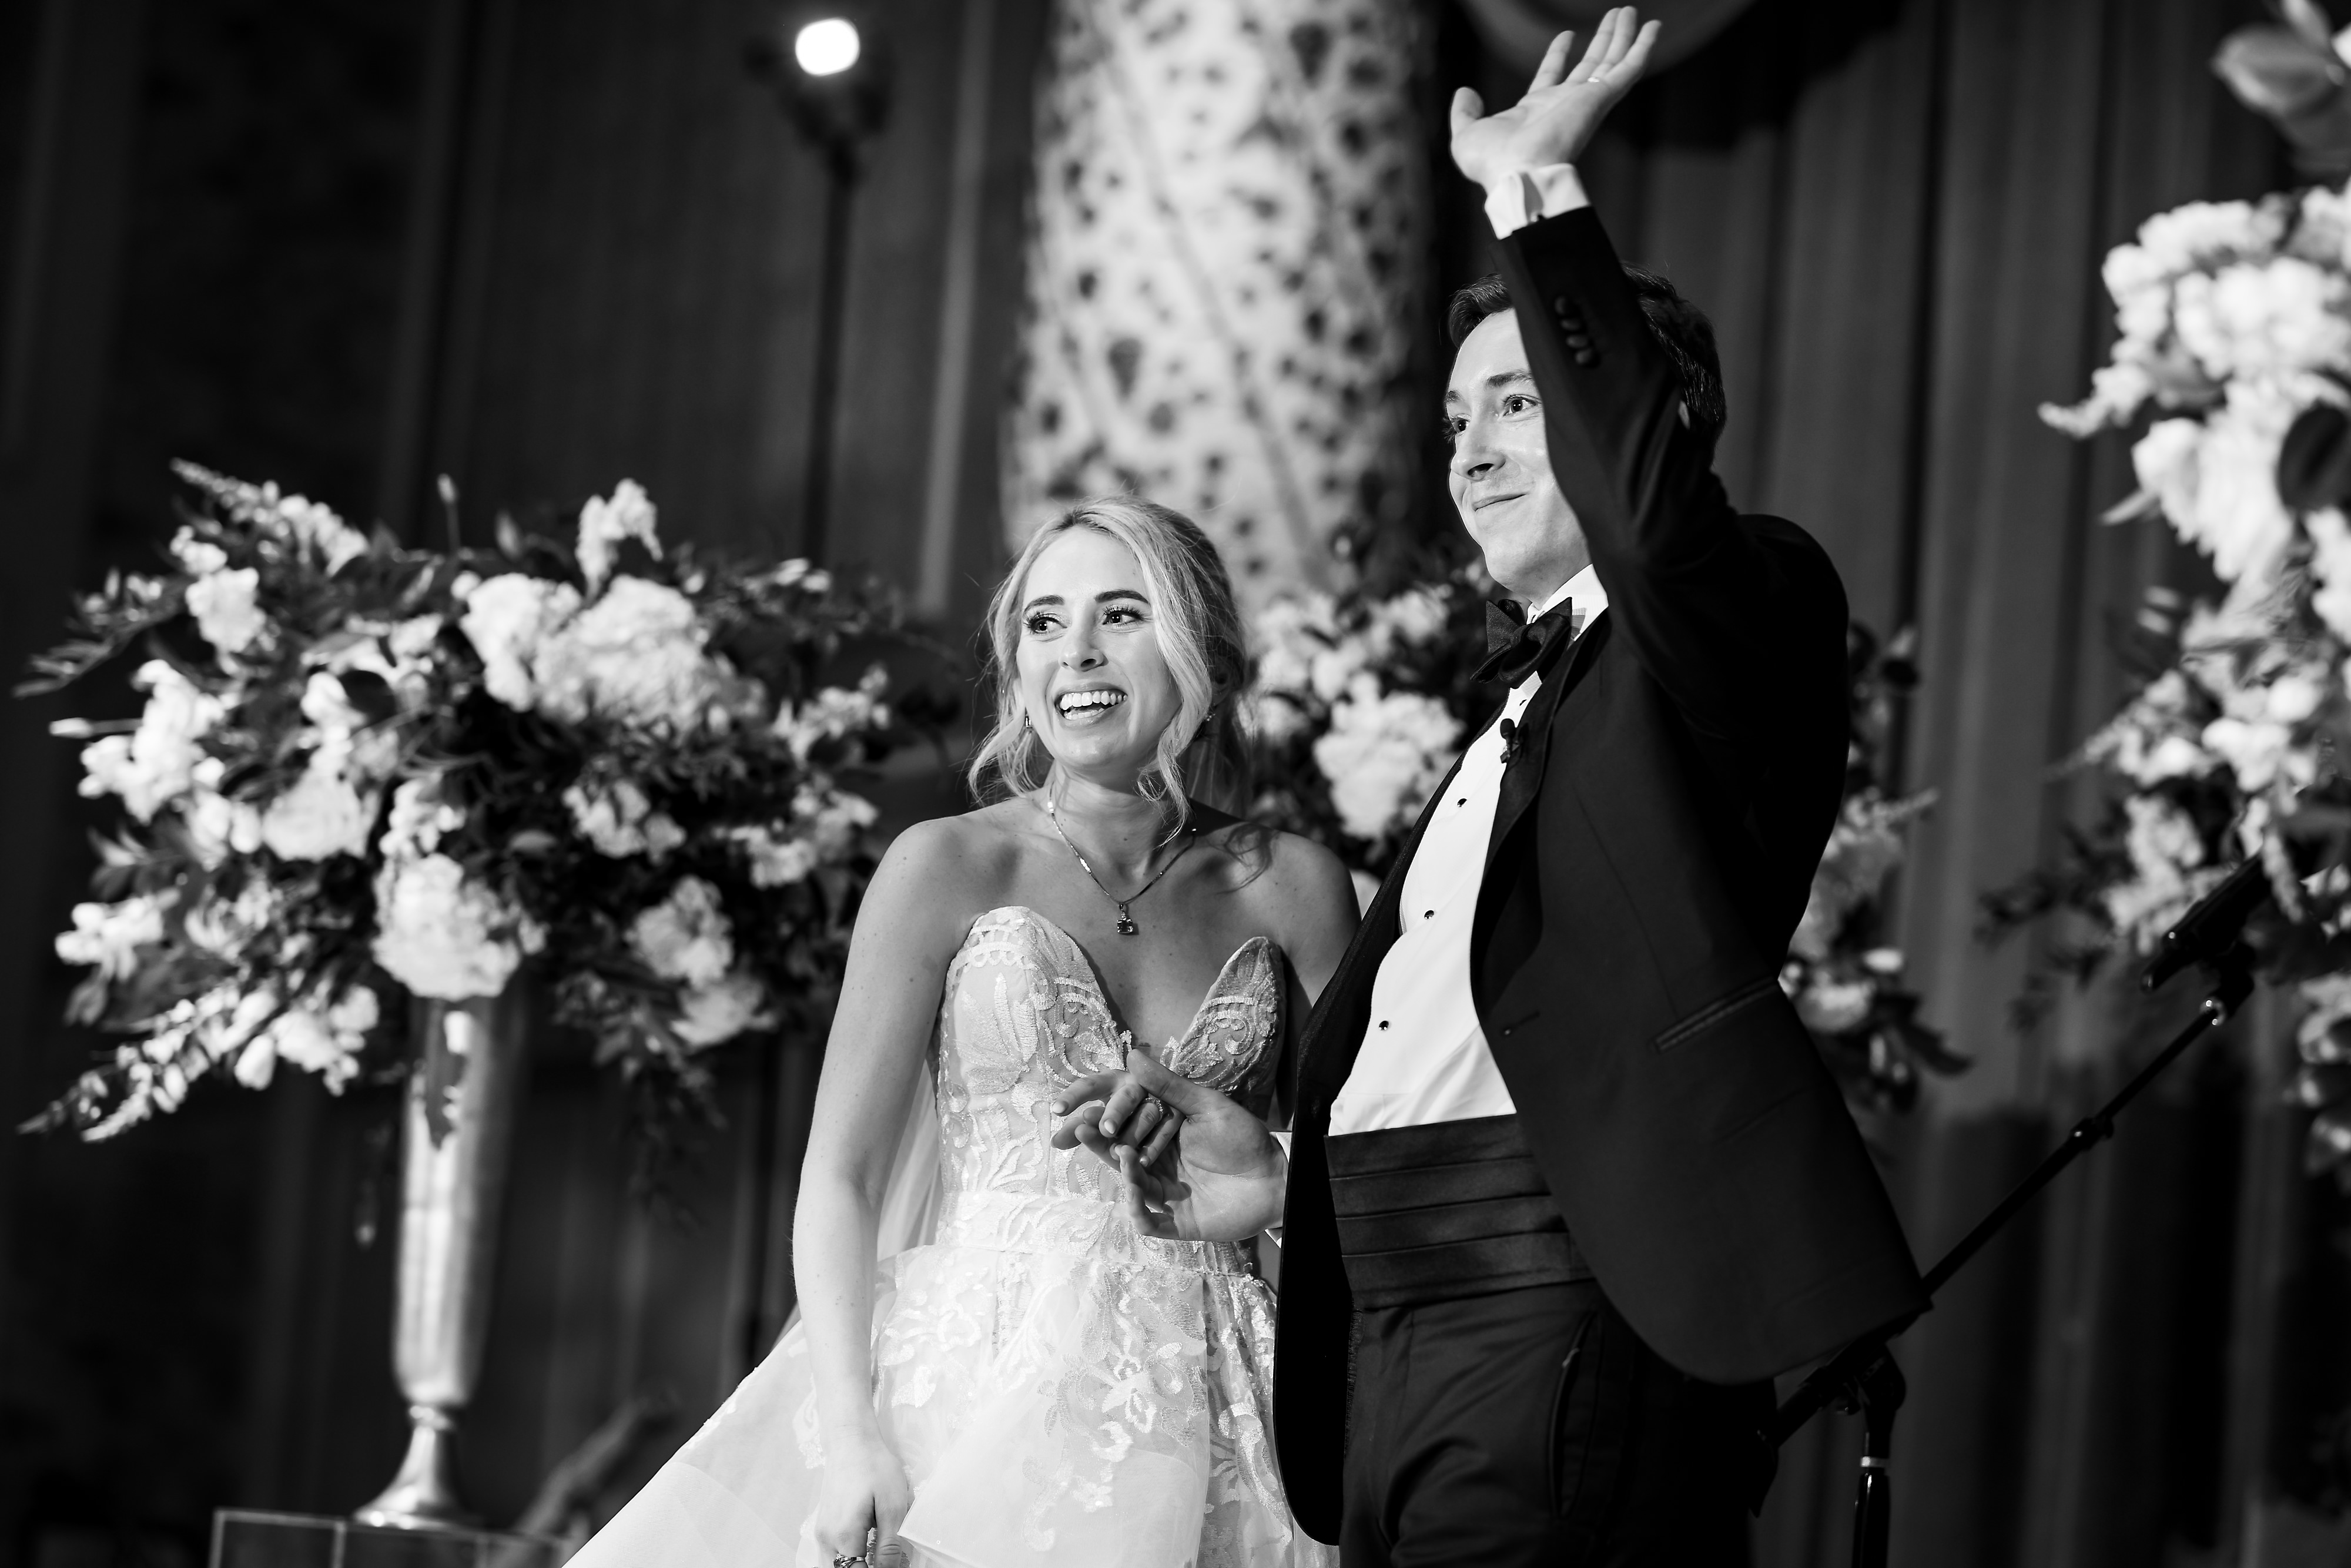 Bride and Groom wave to guests during wedding ceremony in the Grand Ballroom at The Drake Hotel in Chicago